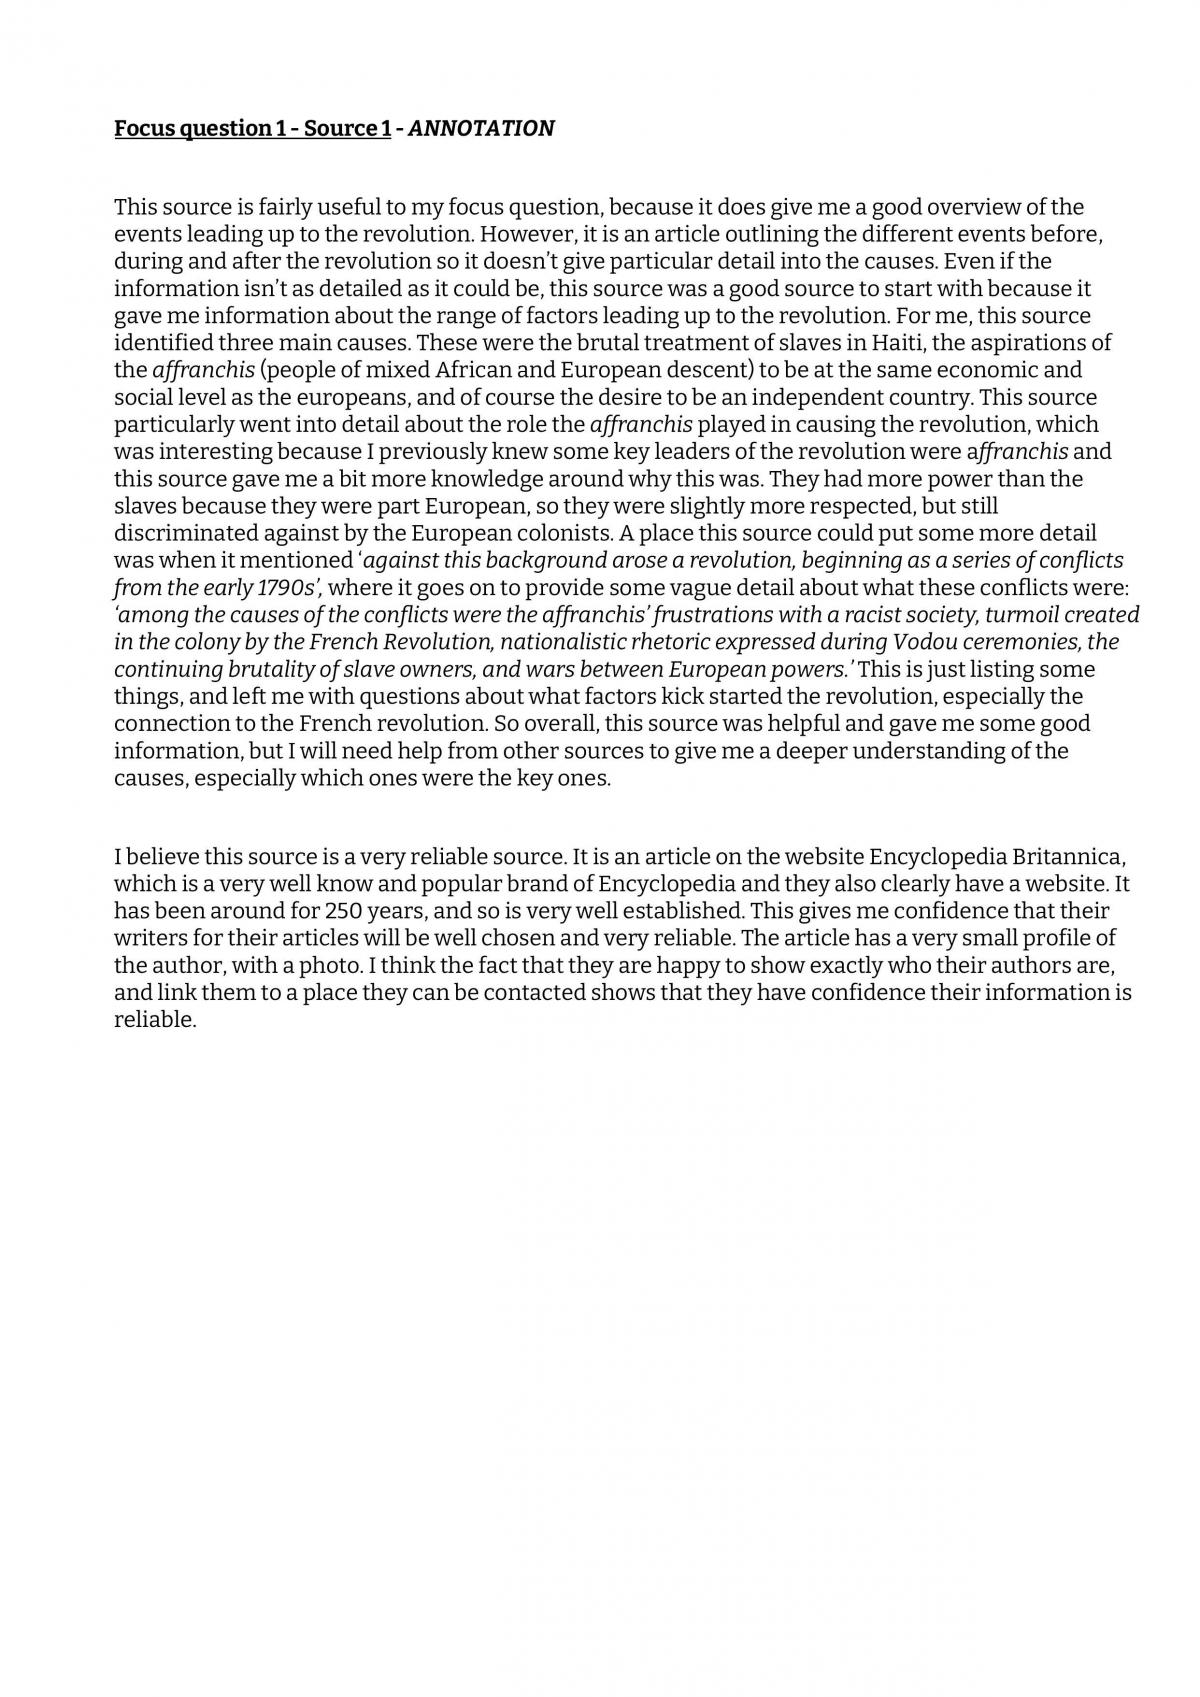 Uprisings report - Level 2 History - Page 8